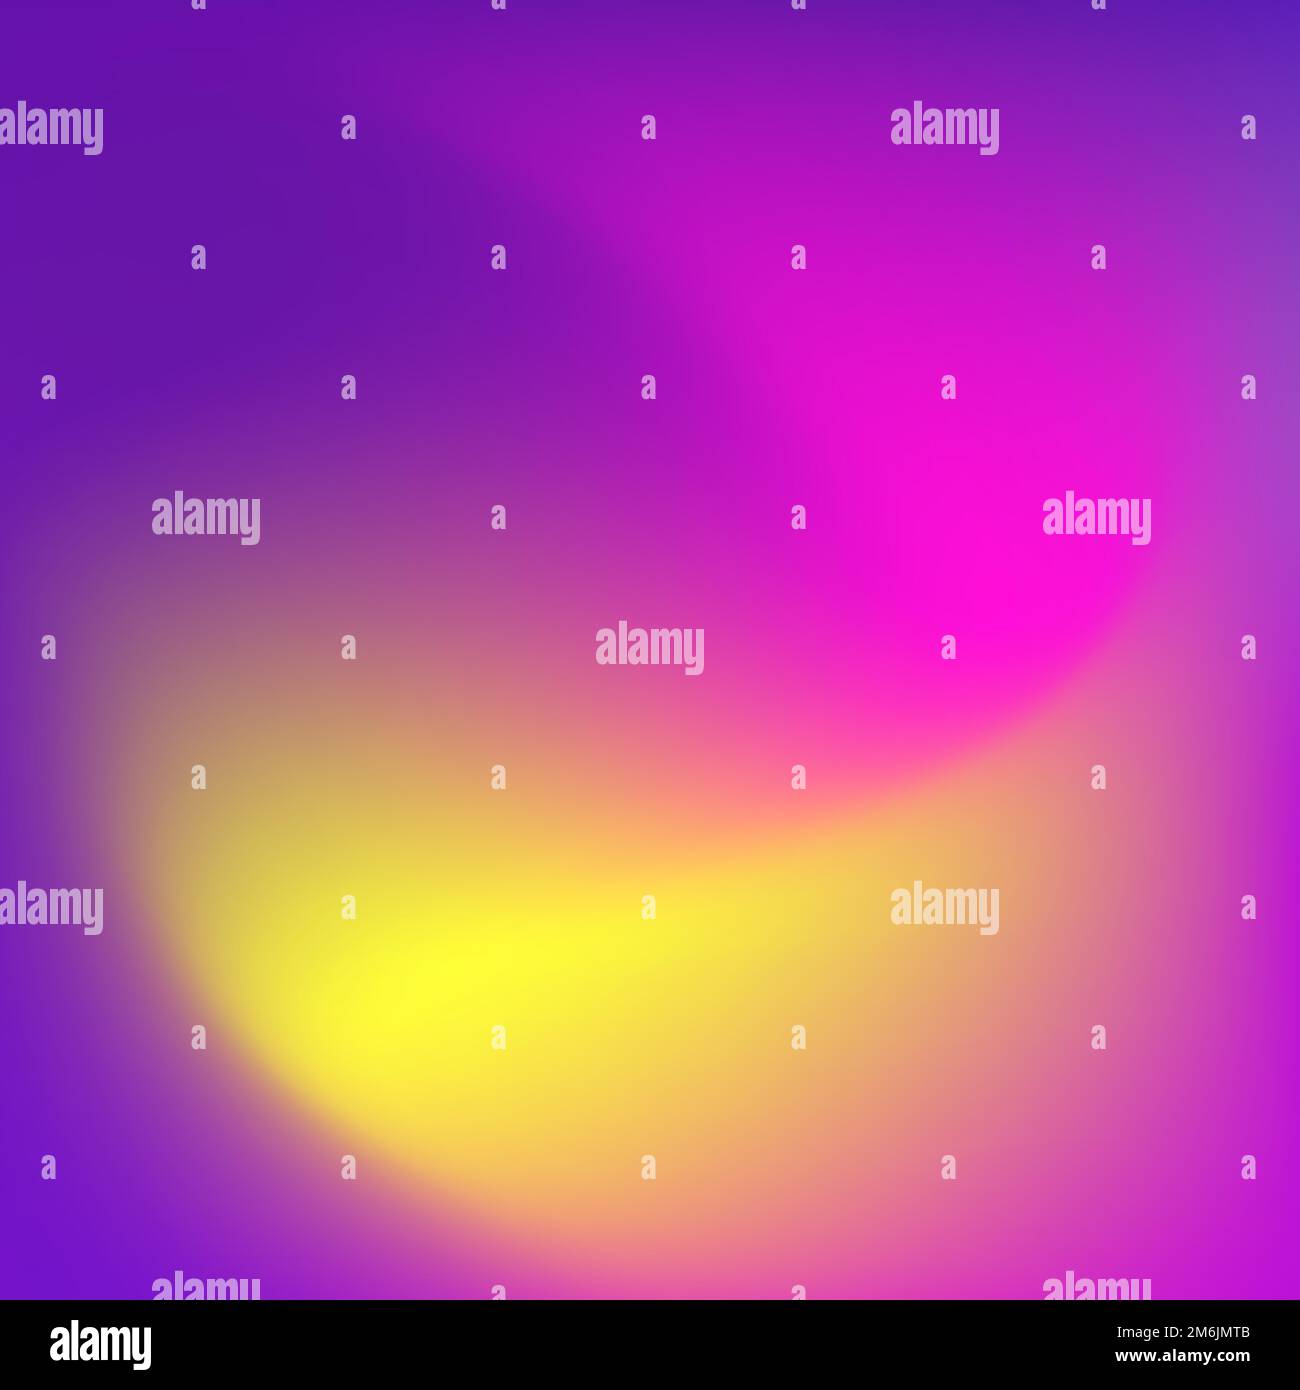 Blurred wavy bright gradient background. Purple, pink, yellow abstract square wallpaper. Liquid flowing vibrant mesh texture.  Stock Vector